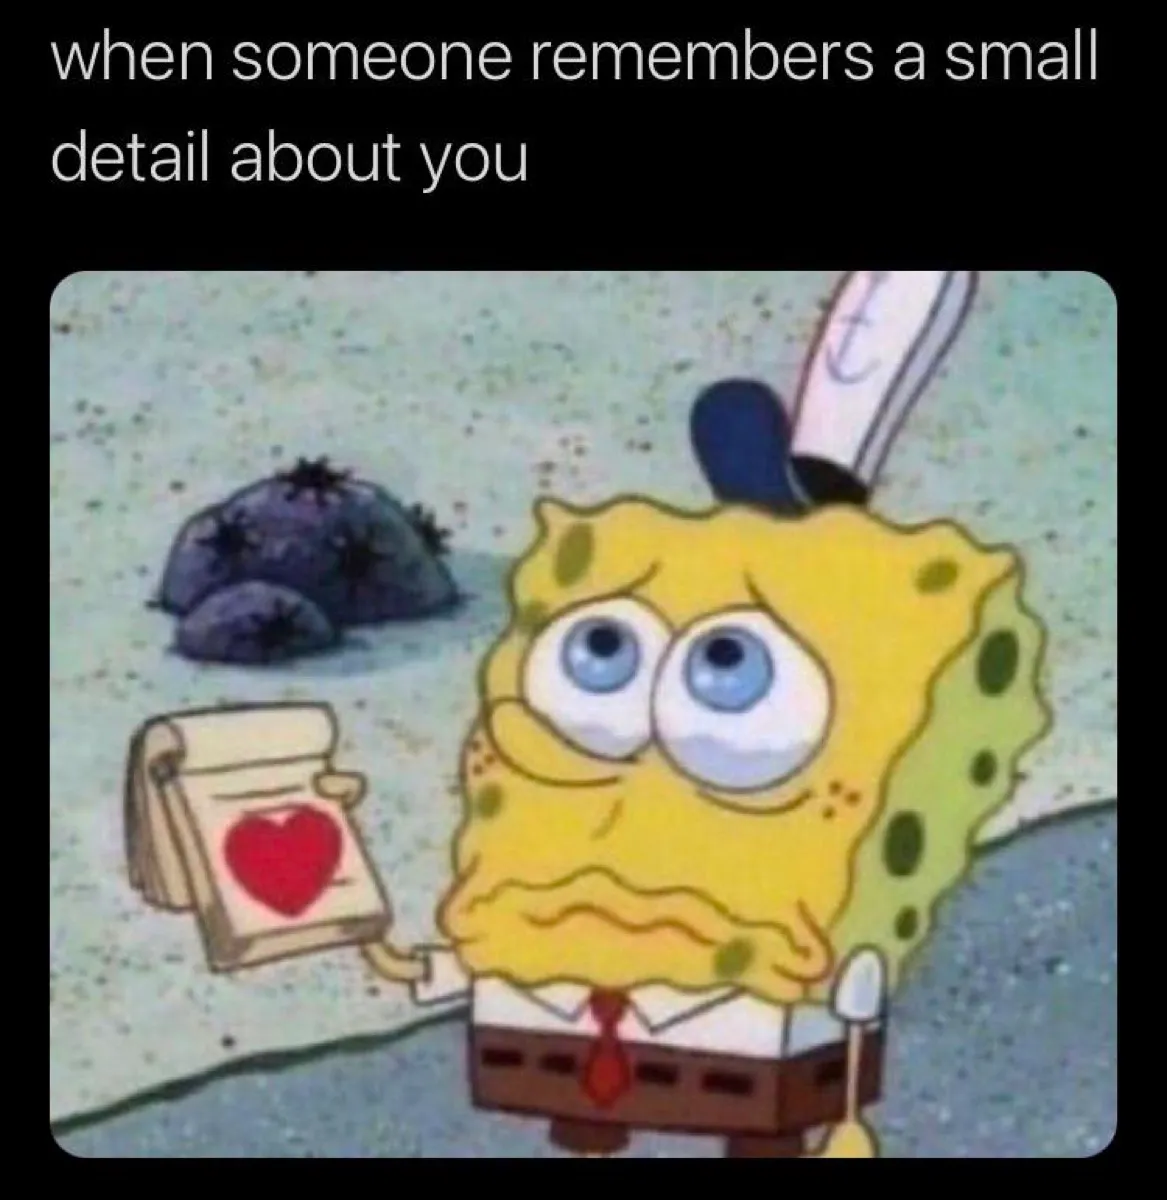 Cartoon of crying SpongeBob holding a notebook with a heart, captioned, "When someone remembers a small detail about you."